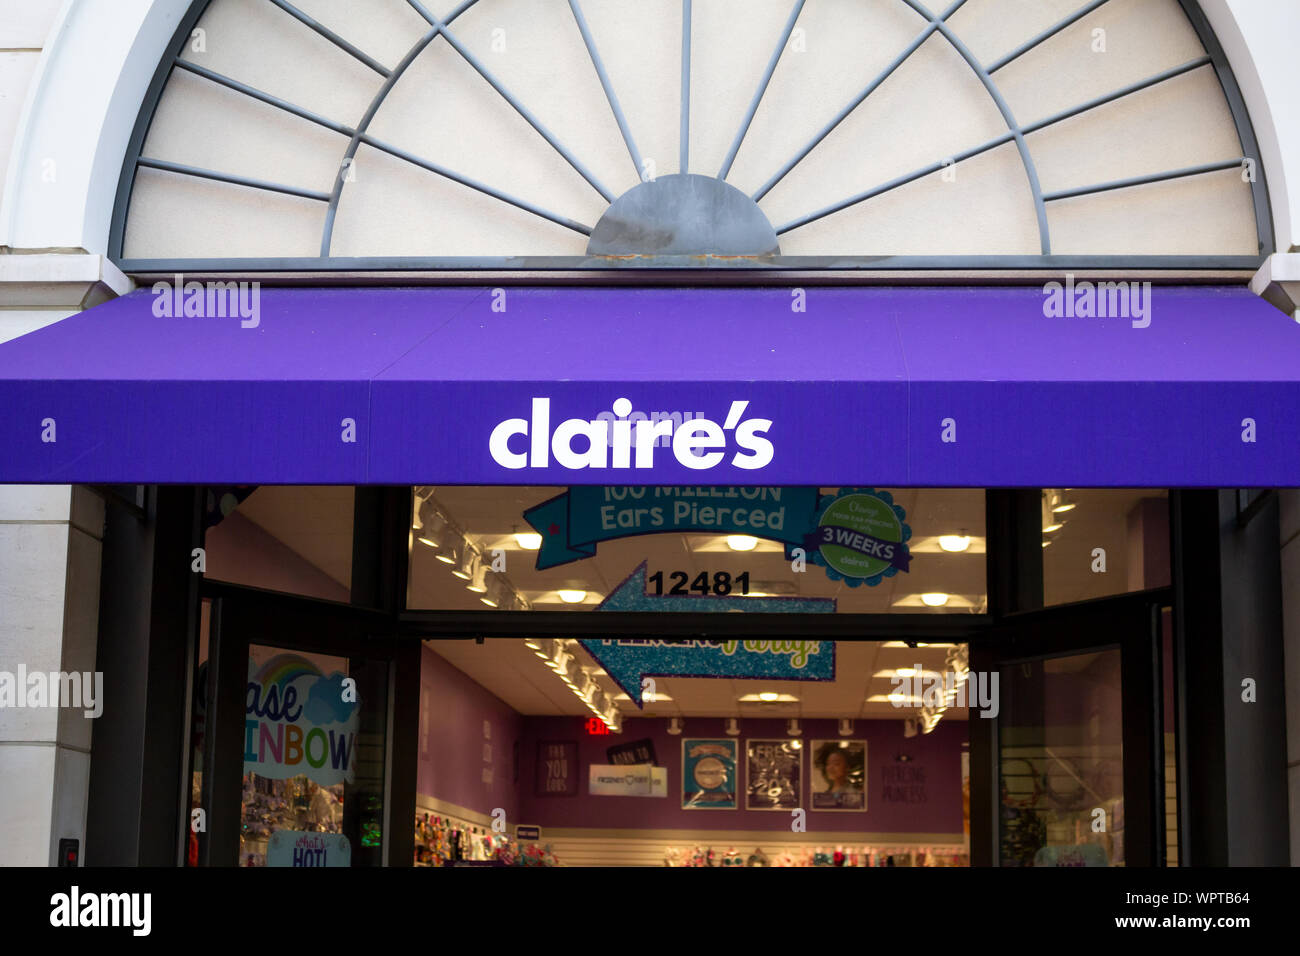 Los Angeles, California, United States - 02-27-2019: A view of a store front sign for the accessories shop known as Claire's. Stock Photo